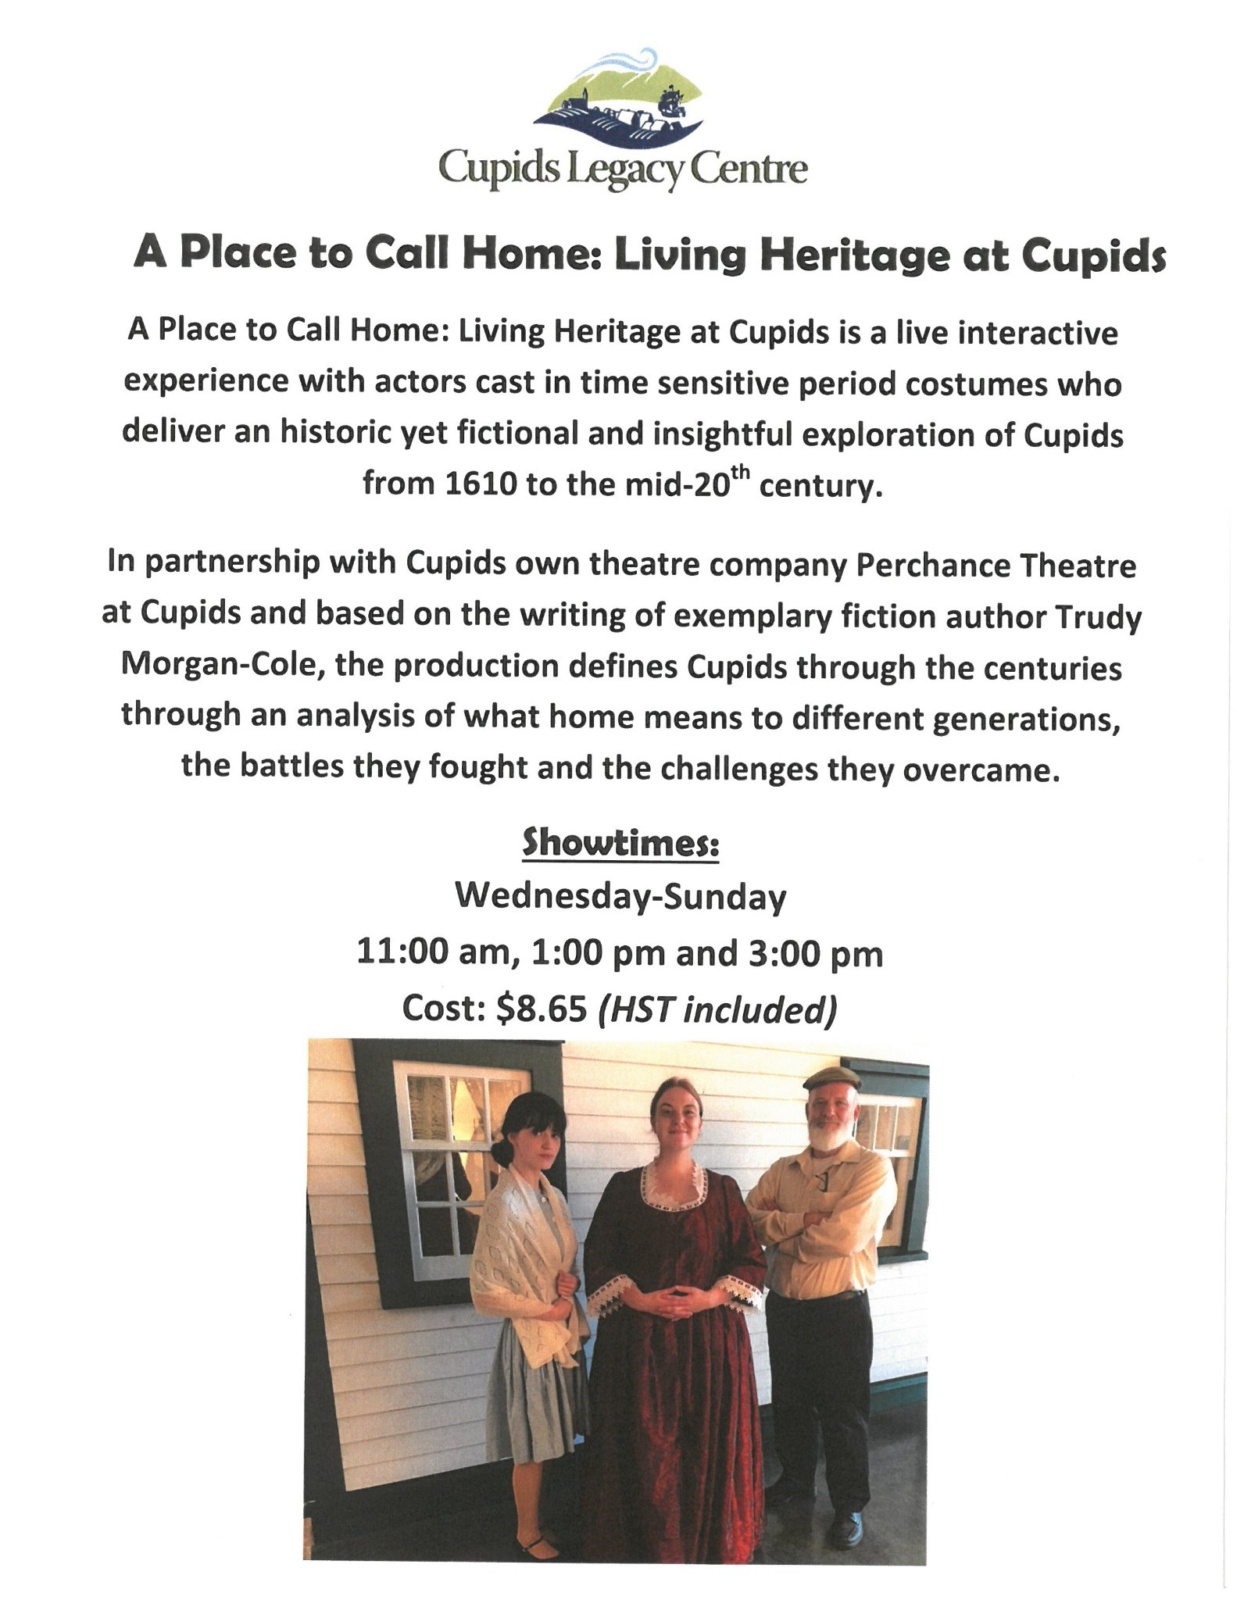 Poster for Cupids Legacy Centre's 'A Place to Call Home: Living Heritage at Cupids'
A Place to Call Home: Living Heritage at Cupids is a live interactive experience with actors cast in time sensitive period costumes who deliver an historic yet fictional and insightful exploration of Cupids from 1610 to the mid-20th century.
In partnership with Cupids own theatre company Perchance Theatre at Cupids and based on the writing of exemplary fiction author Trudy Morgan-Cole, the production defines Cupids through the centuries through an analysis of what home means to different generations, the battles they fought and the challenges they overcame.
Showtimes:
Wednesday-Sunday
11:00 am, 1:00 pm and 3:00 pm
Cost: $8.65 (HST included)
Photo of Nicole Redmond as Louisa Dawe, Monica Walsh as Kathryn Guy, and Bruce Brenton as Sam Rowe in front of a white clapboarded wall with two windows.